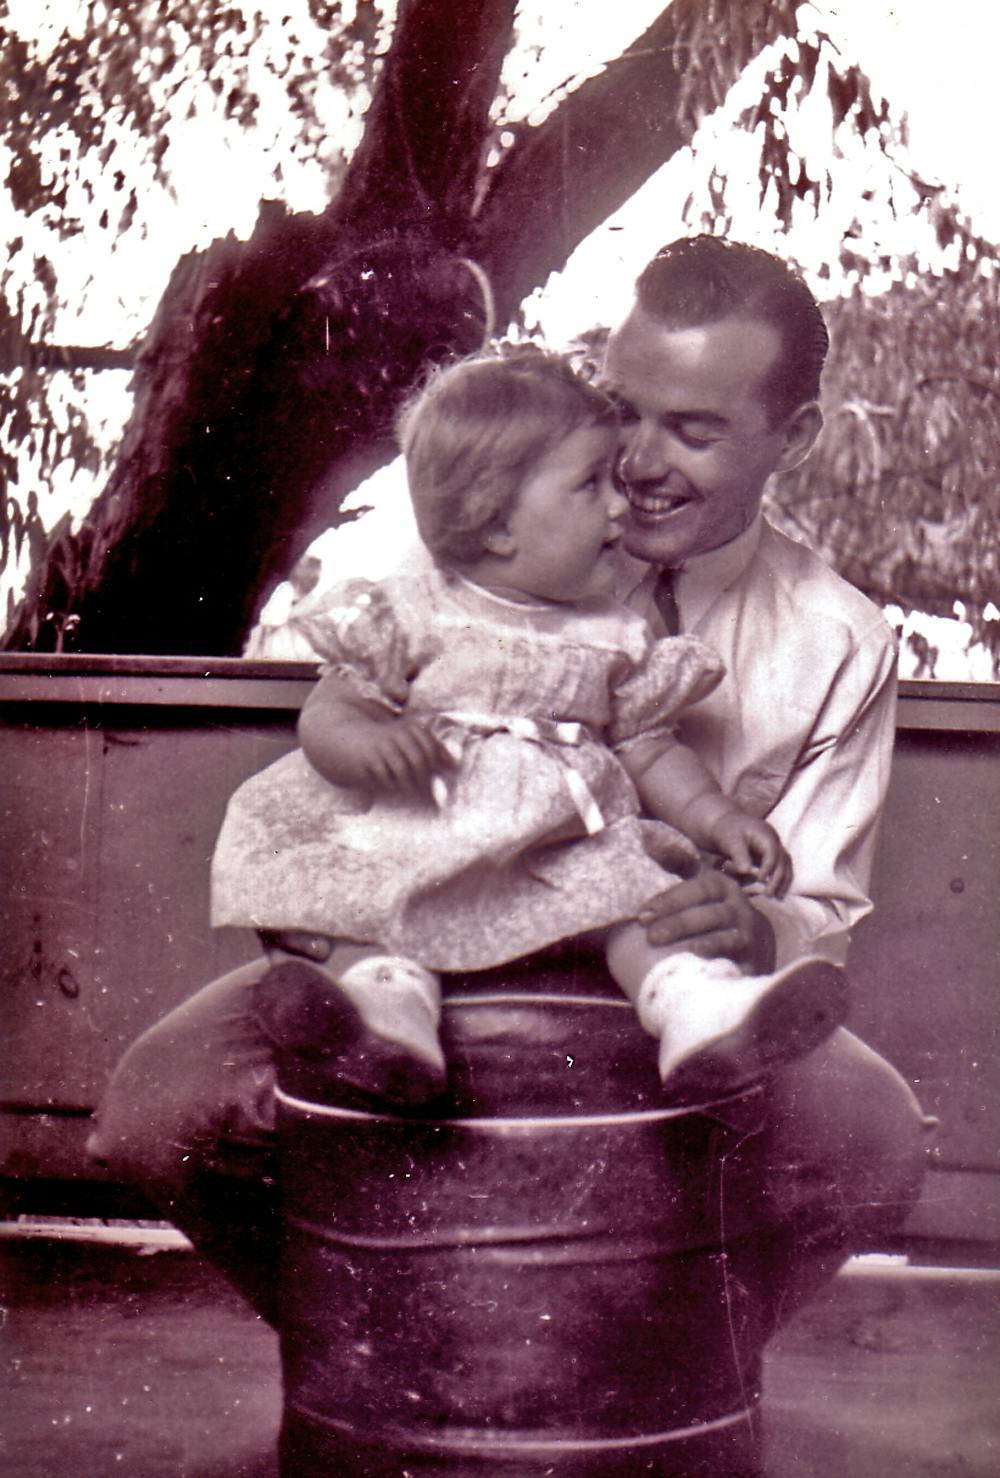 Stanley with his young daughter